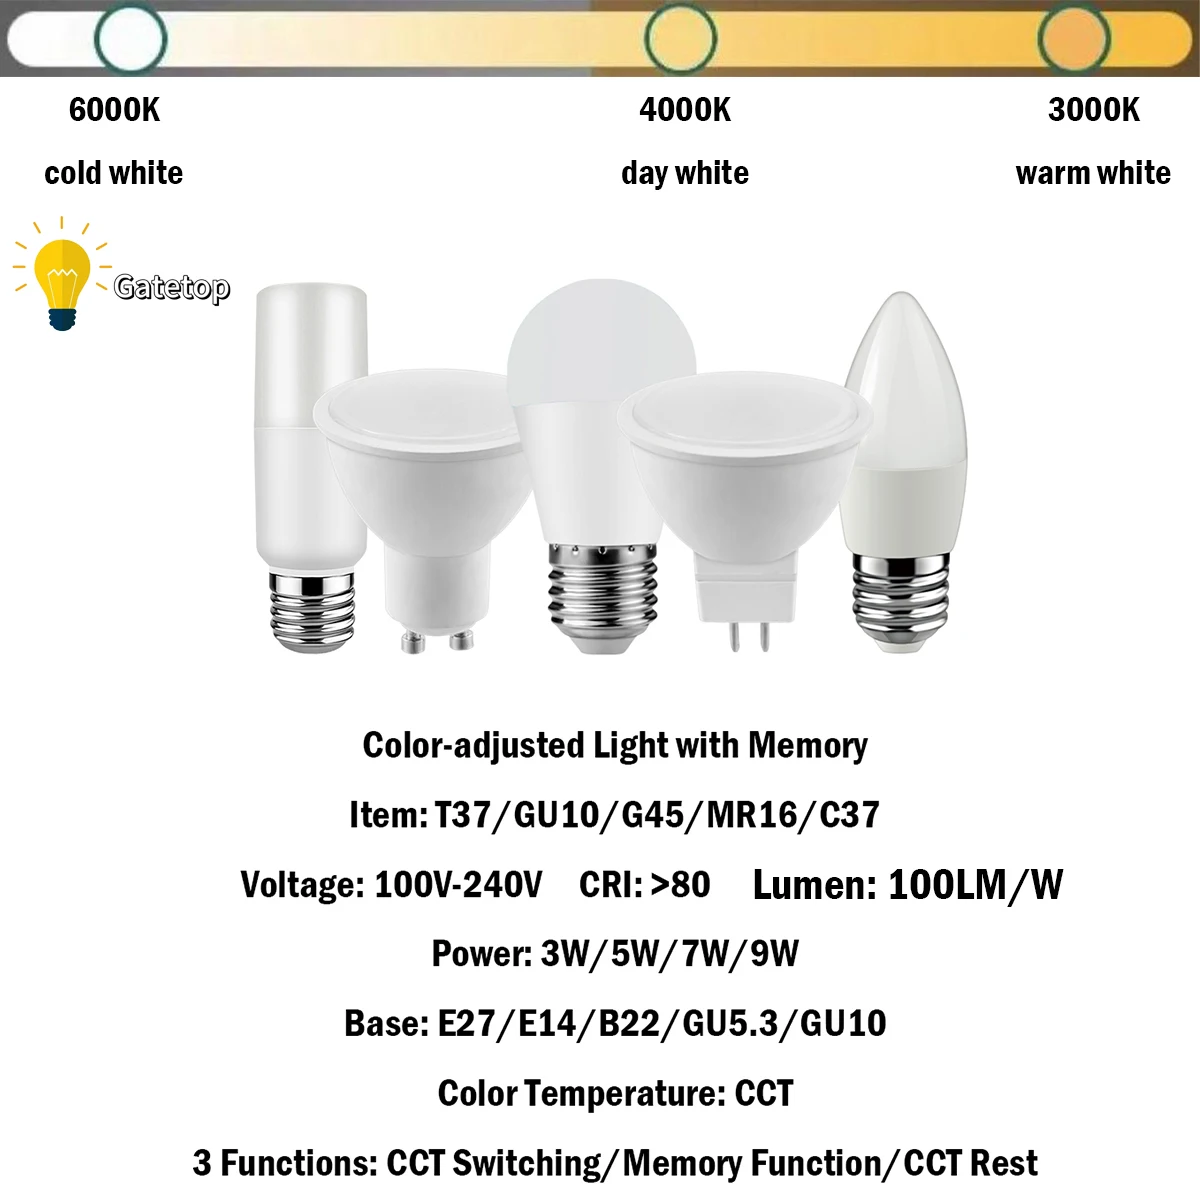 10PCS New LED Smart Light 3 Color-Adjusted with Memory 3-9W 100-240V GU10/MR16/C37/T37/G45 No Strobe 3 Functions for Home Office